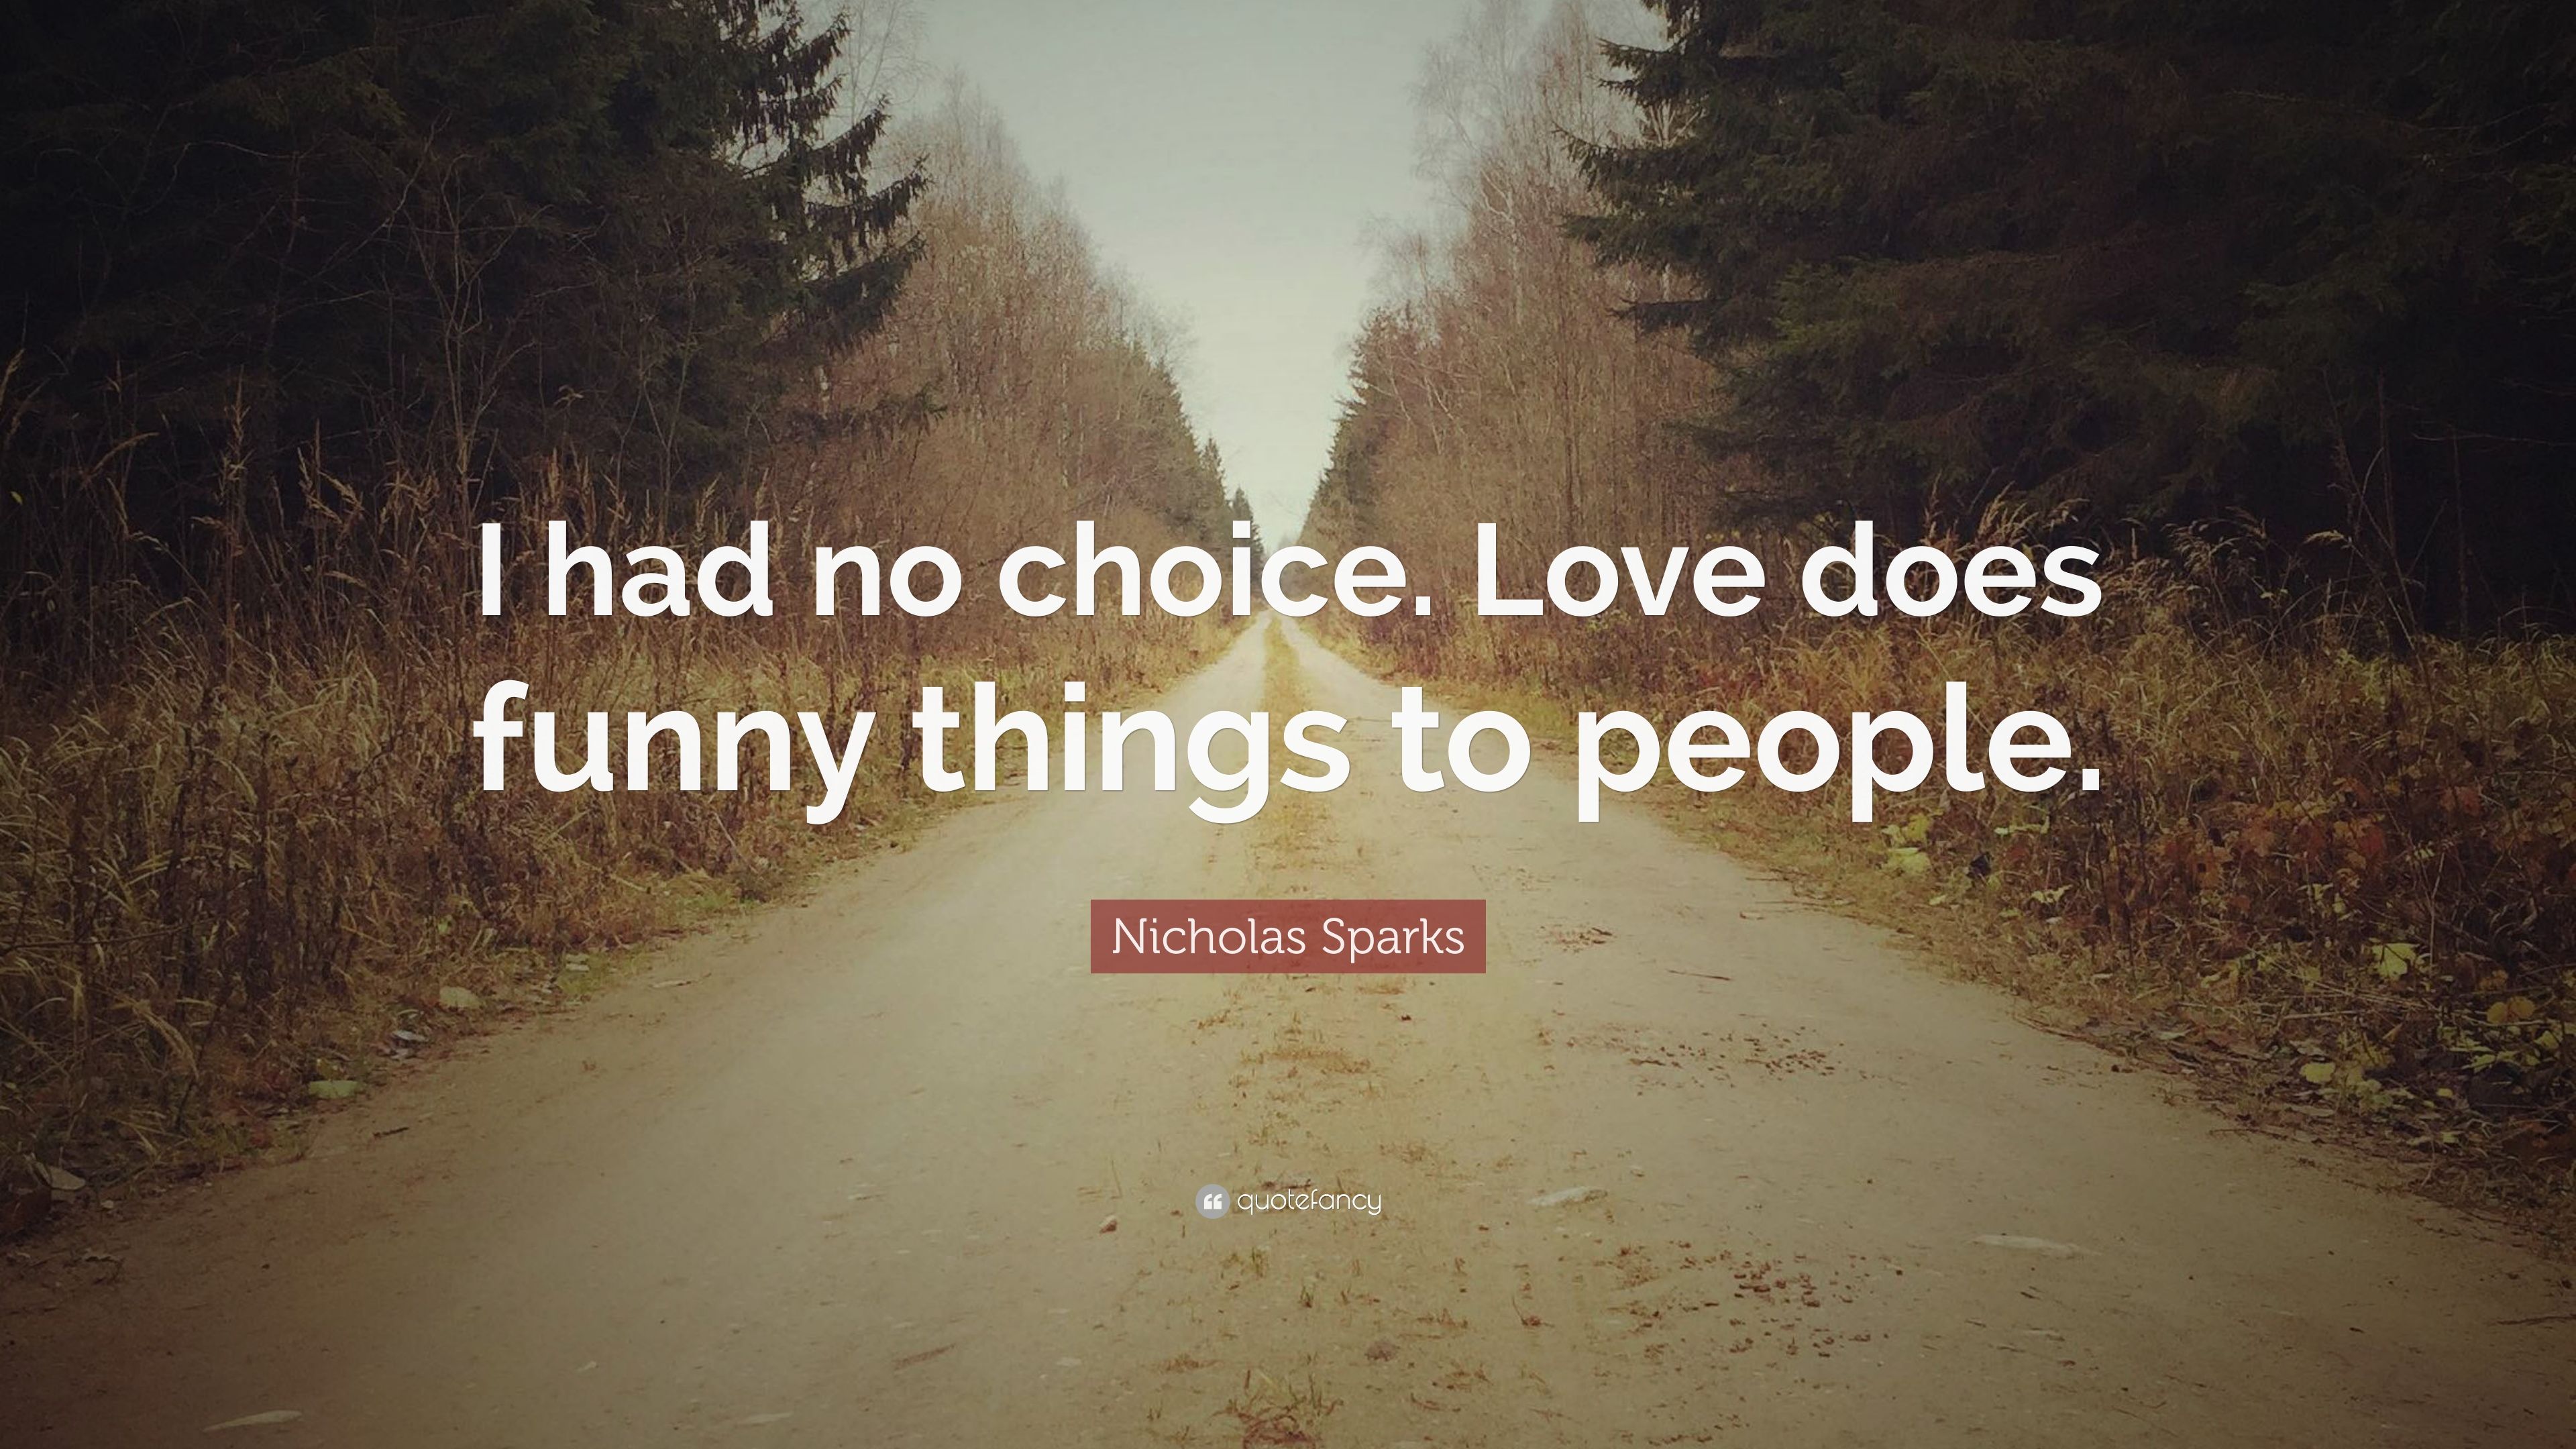 Nicholas Sparks Quote: “I had no choice. Love does funny things to